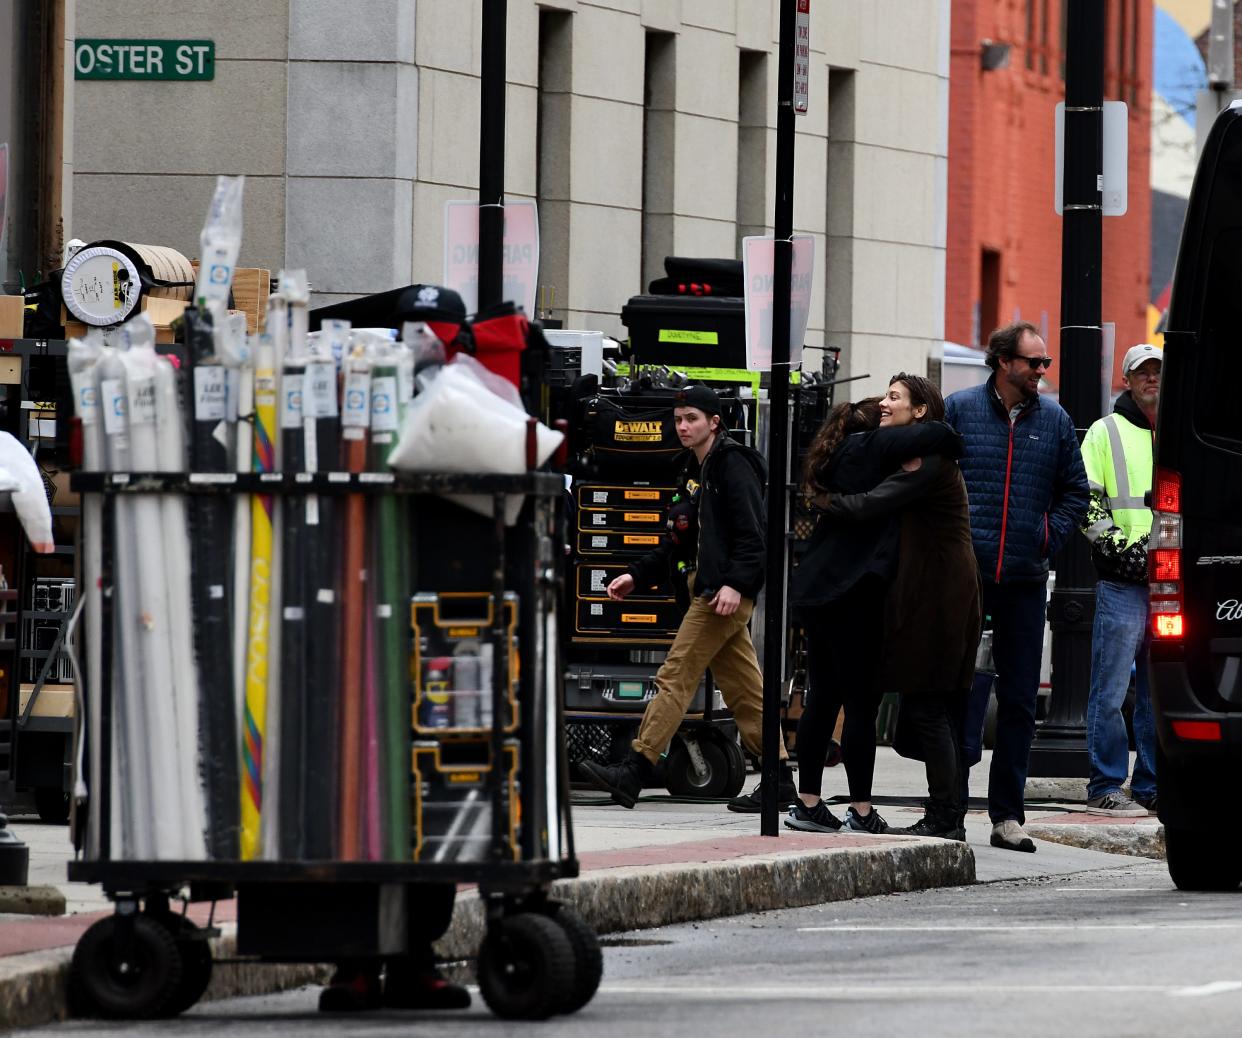 "The Walking Dead" star Lauren Cohan arrives to the The Walking Dead: Dead City set at Norwich and Foster Streets on Wednesday.